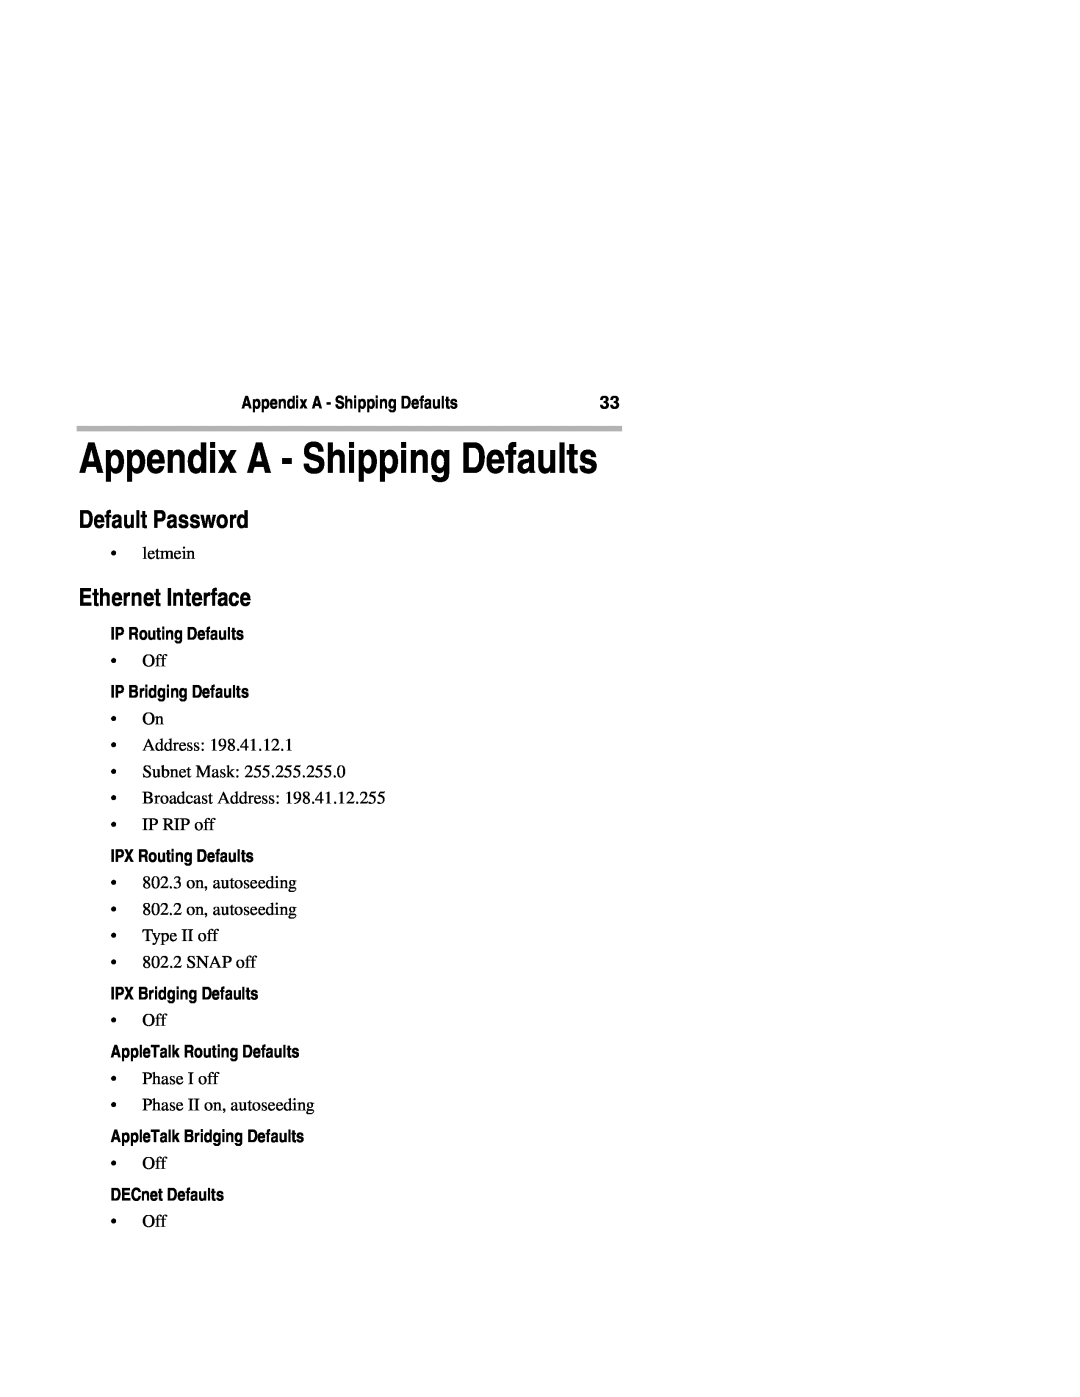 Compatible Systems 2250R manual Appendix A - Shipping Defaults, Default Password, Ethernet Interface, IP Routing Defaults 